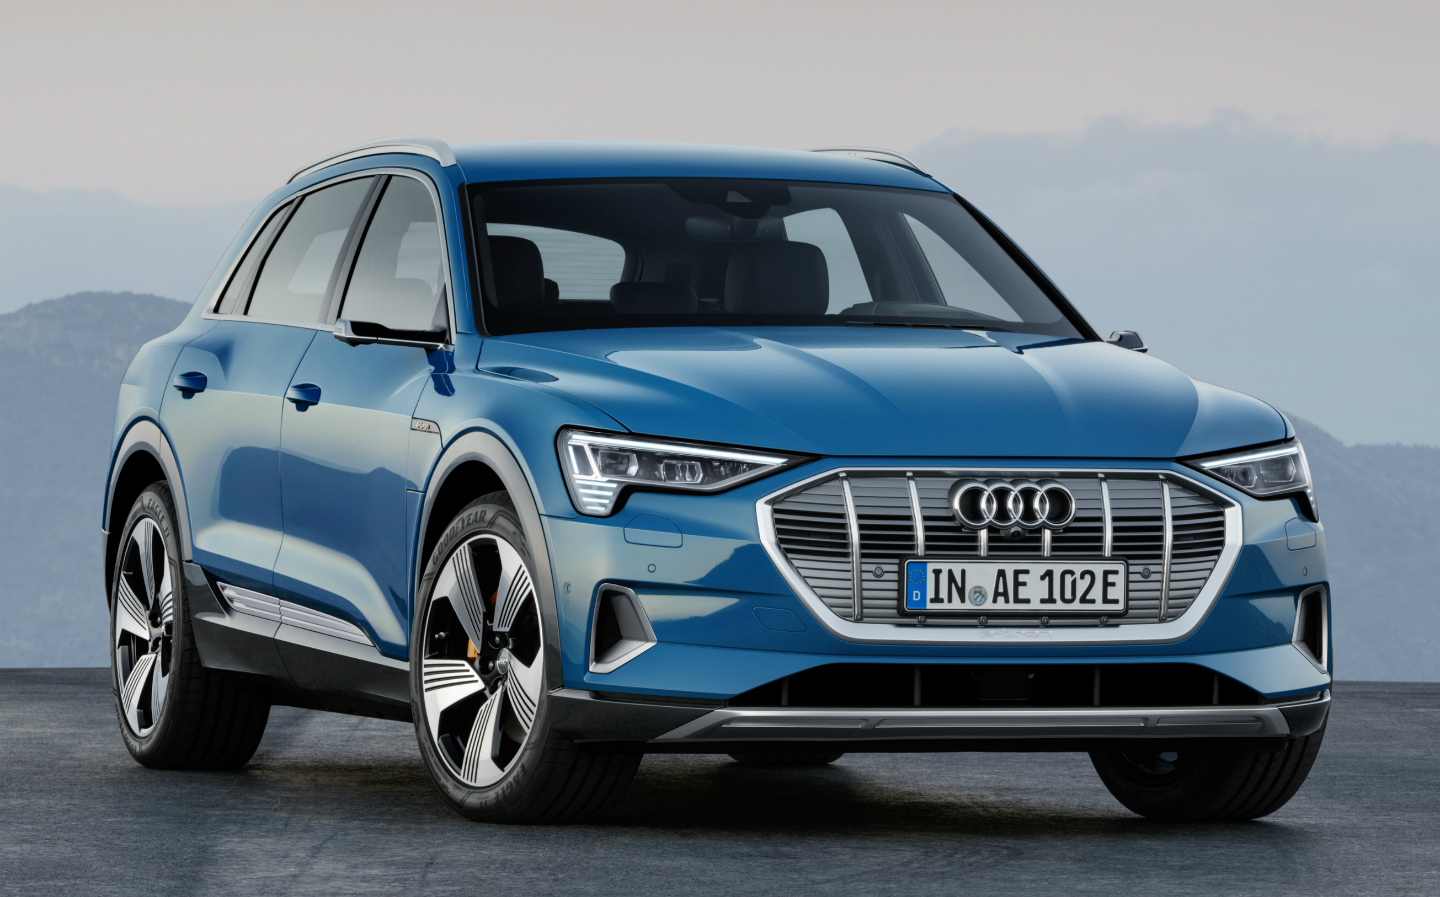 Sunday Times Motor Awards Best Electric Car of the Year. Audi e-tron